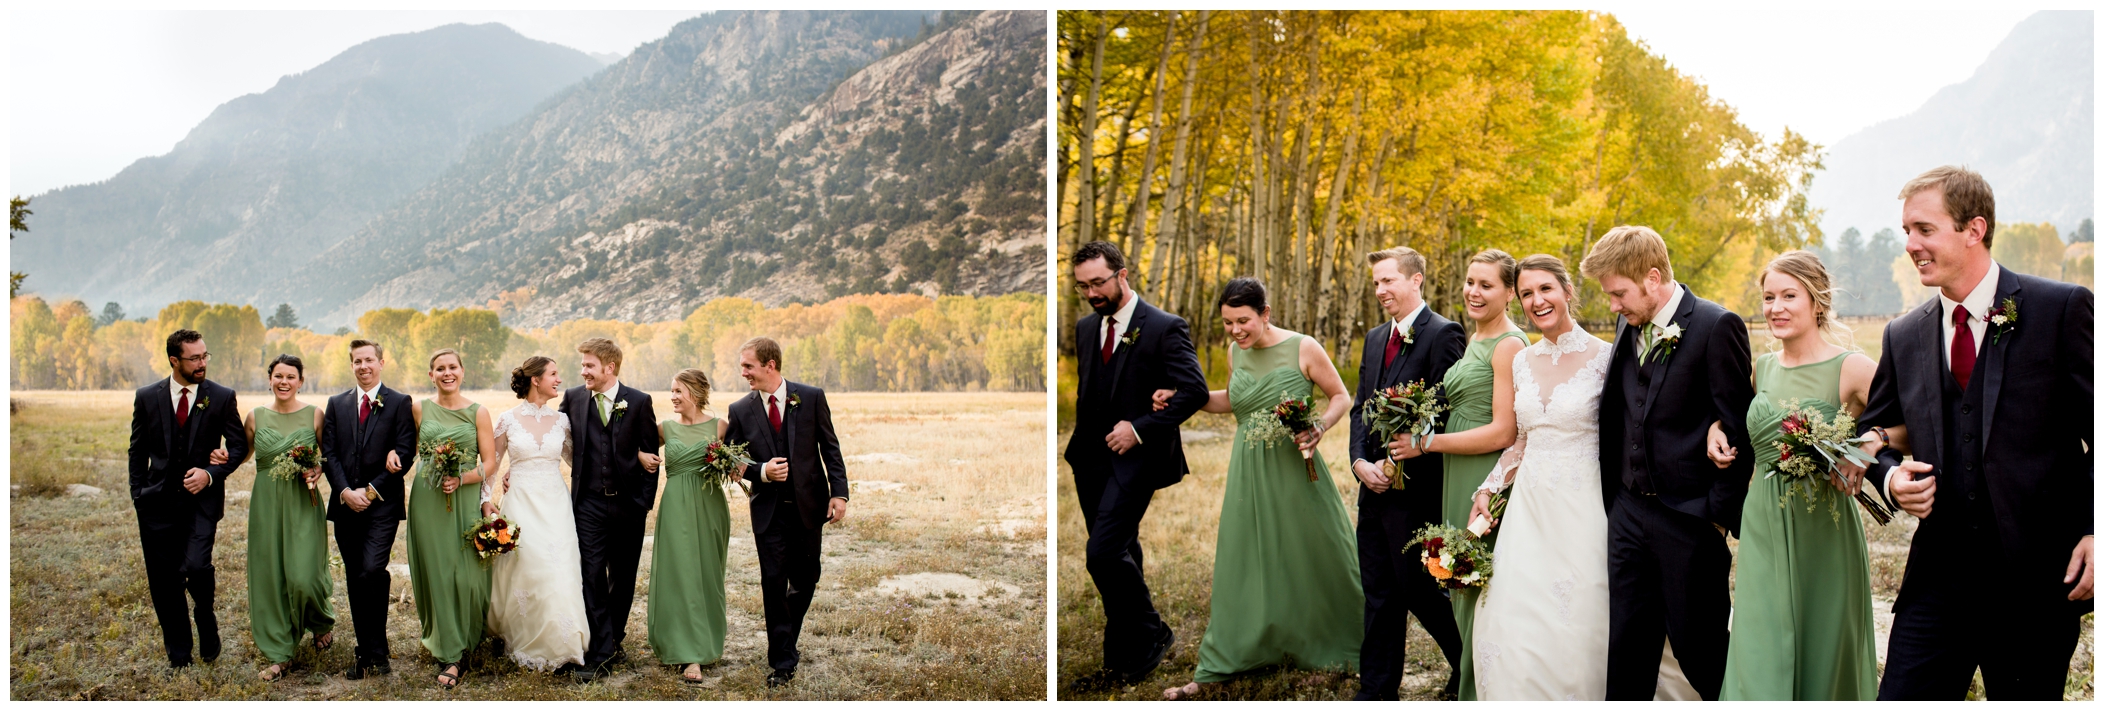 green and red bridal party inspiration 